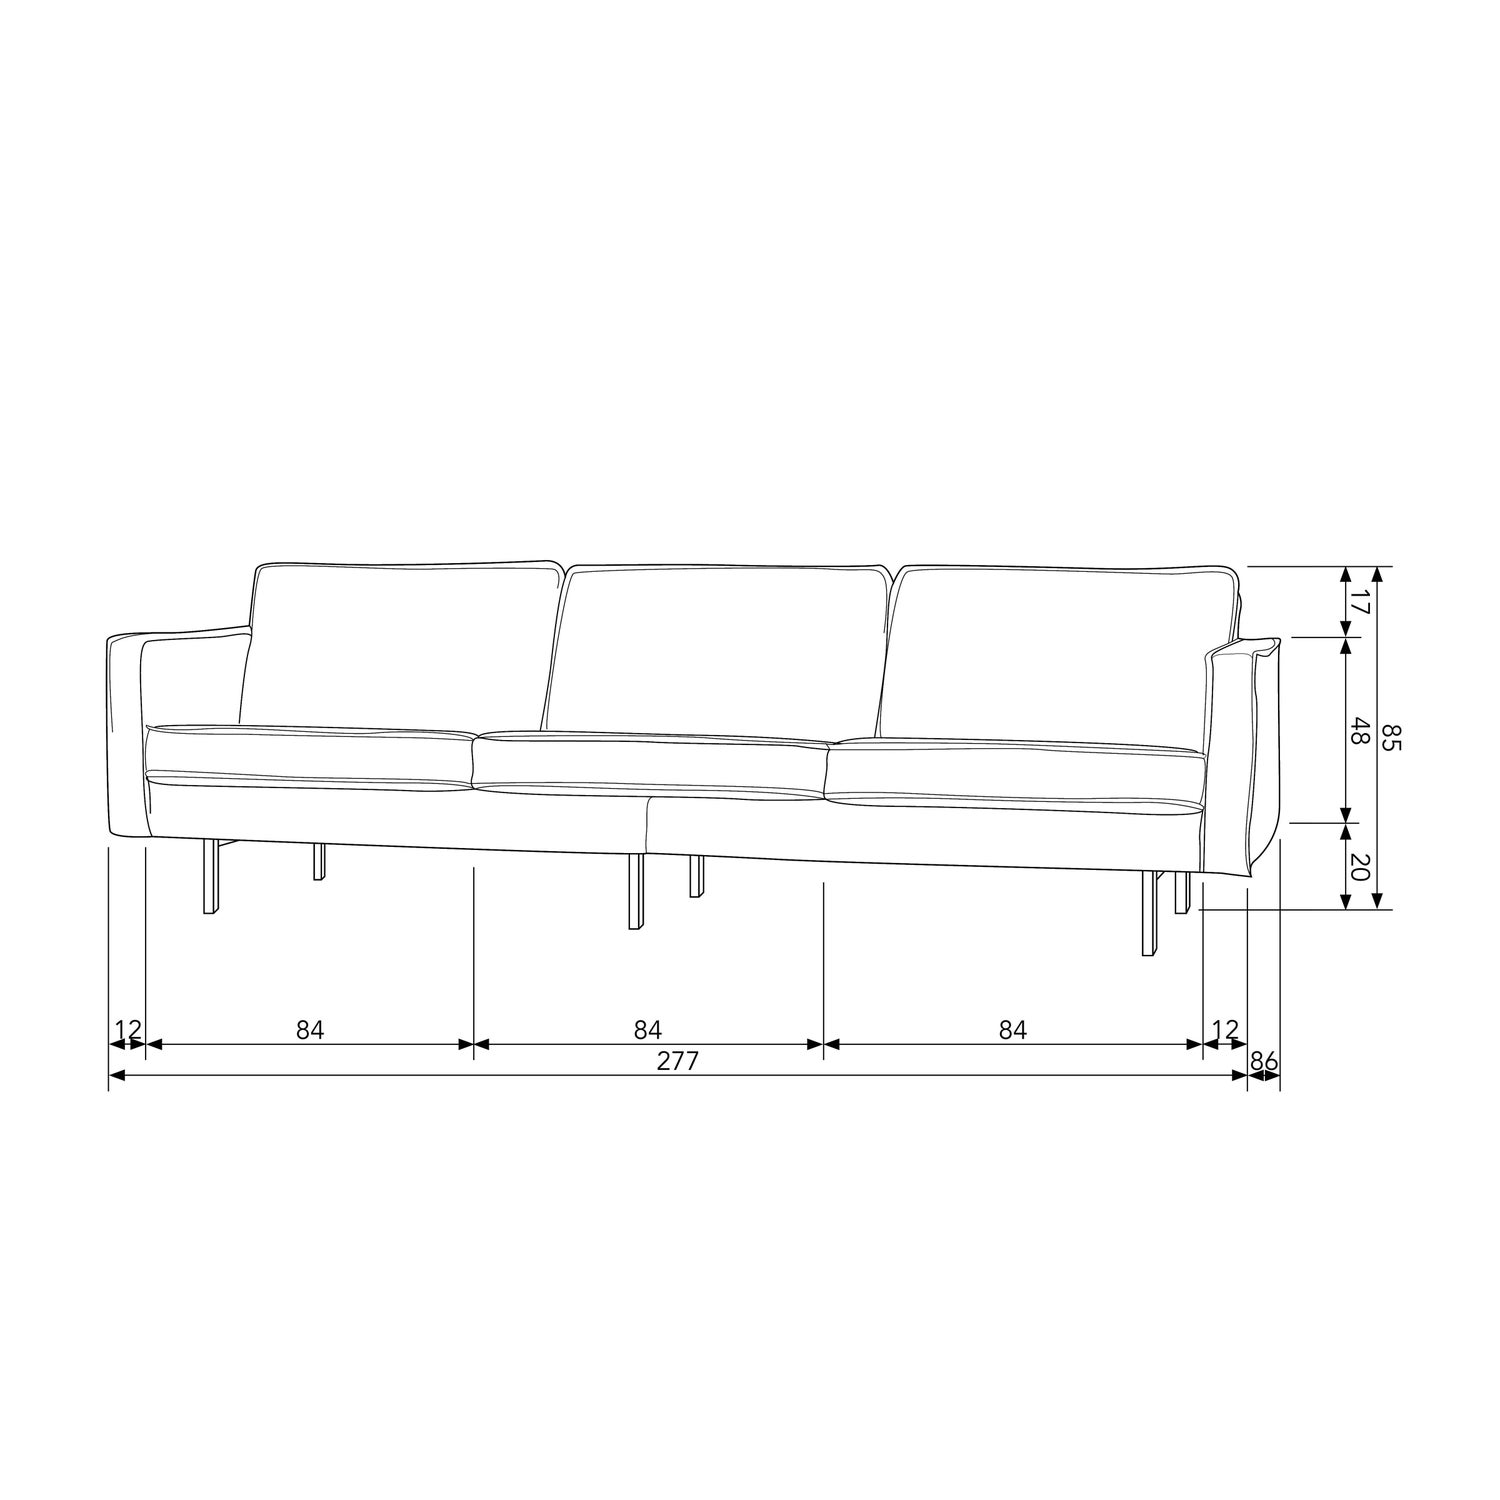 800543-NA-N-G-79-53-45-206-205-198-162-156-14-132-126-12-105-50_BT_Rodeo_3-seater_sofa.jpg?auto=webp&format=png&width=2000&height=2000